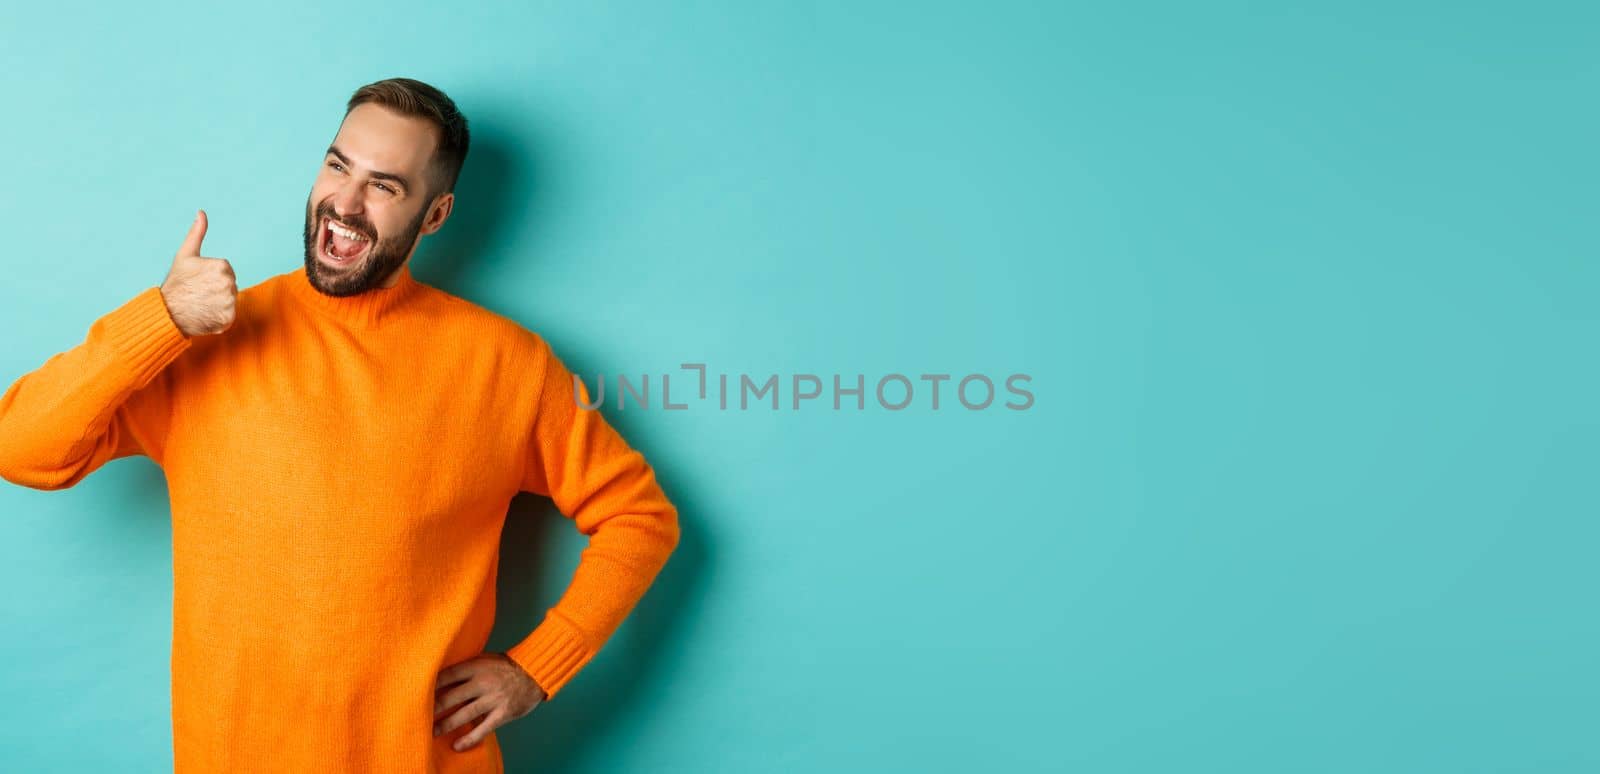 Happy satisfied male model showing thumb up, looking pleased at upper left corner logo, approve and recommend product, standing over light blue background.